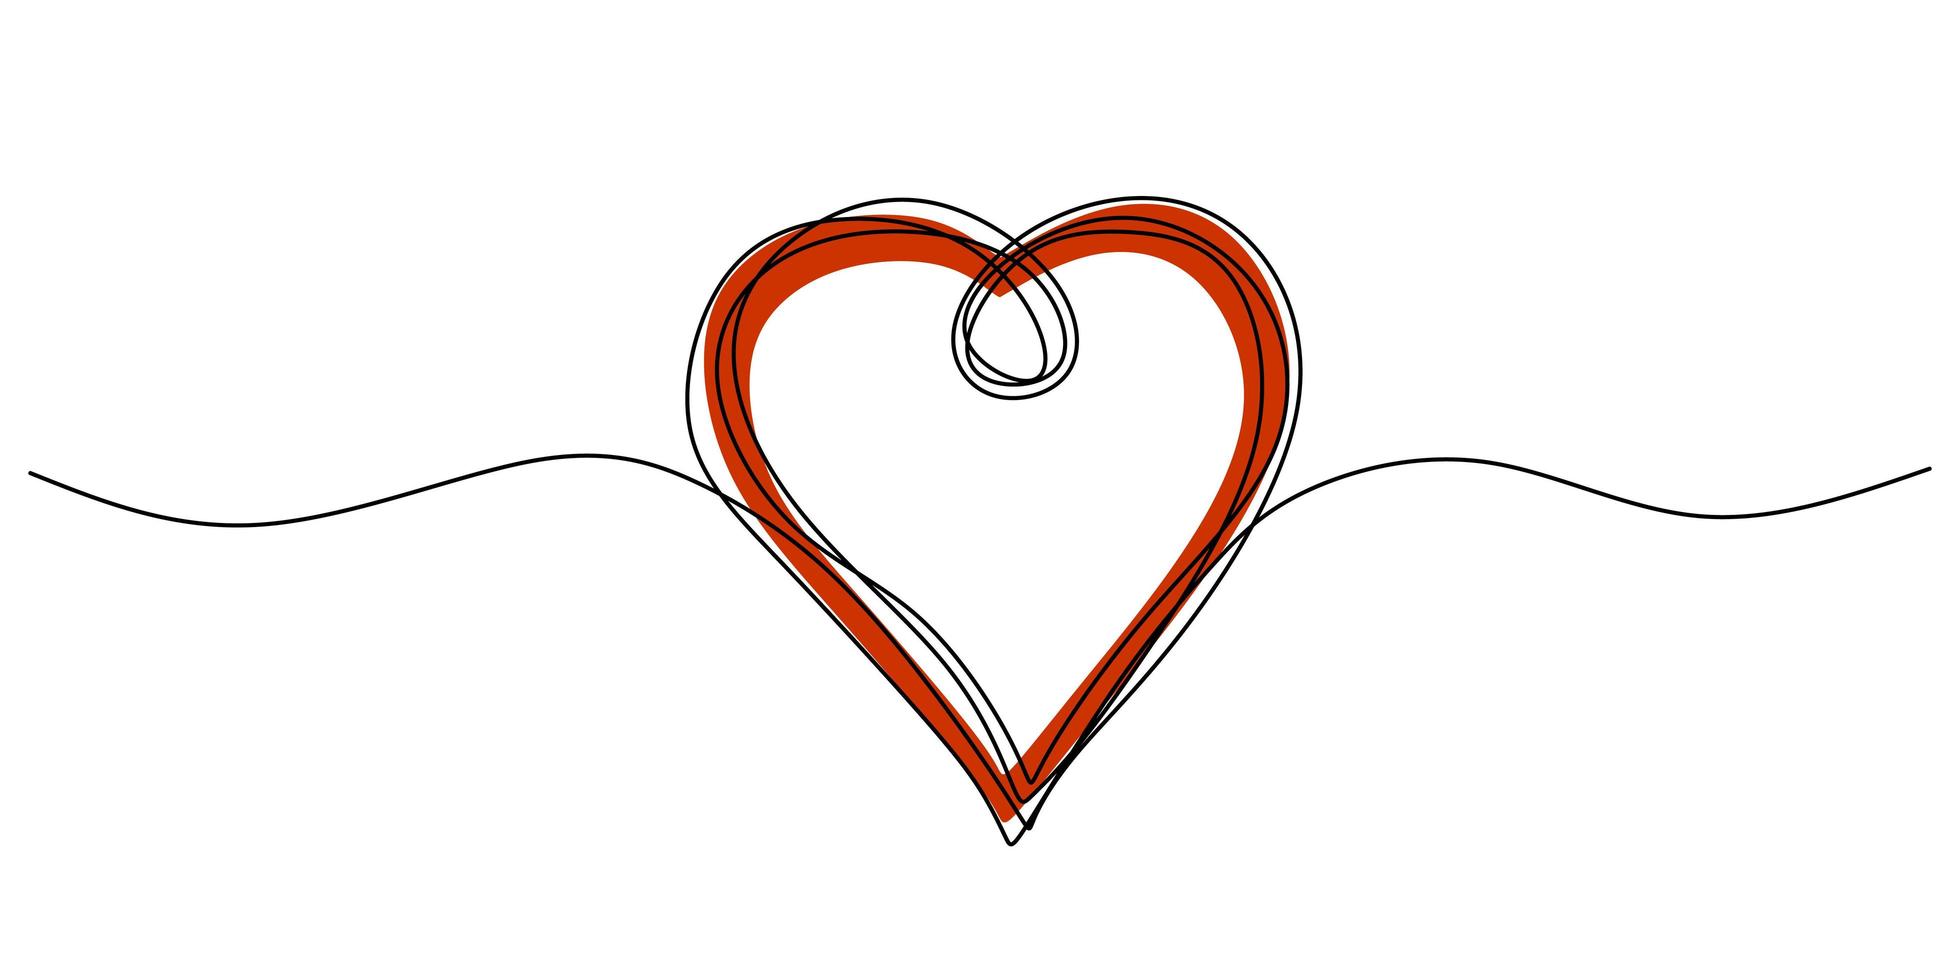 Continuous one line drawing of heart. Symbol of love scribble hand drawn minimalism, artistic line art with pencil texture. vector